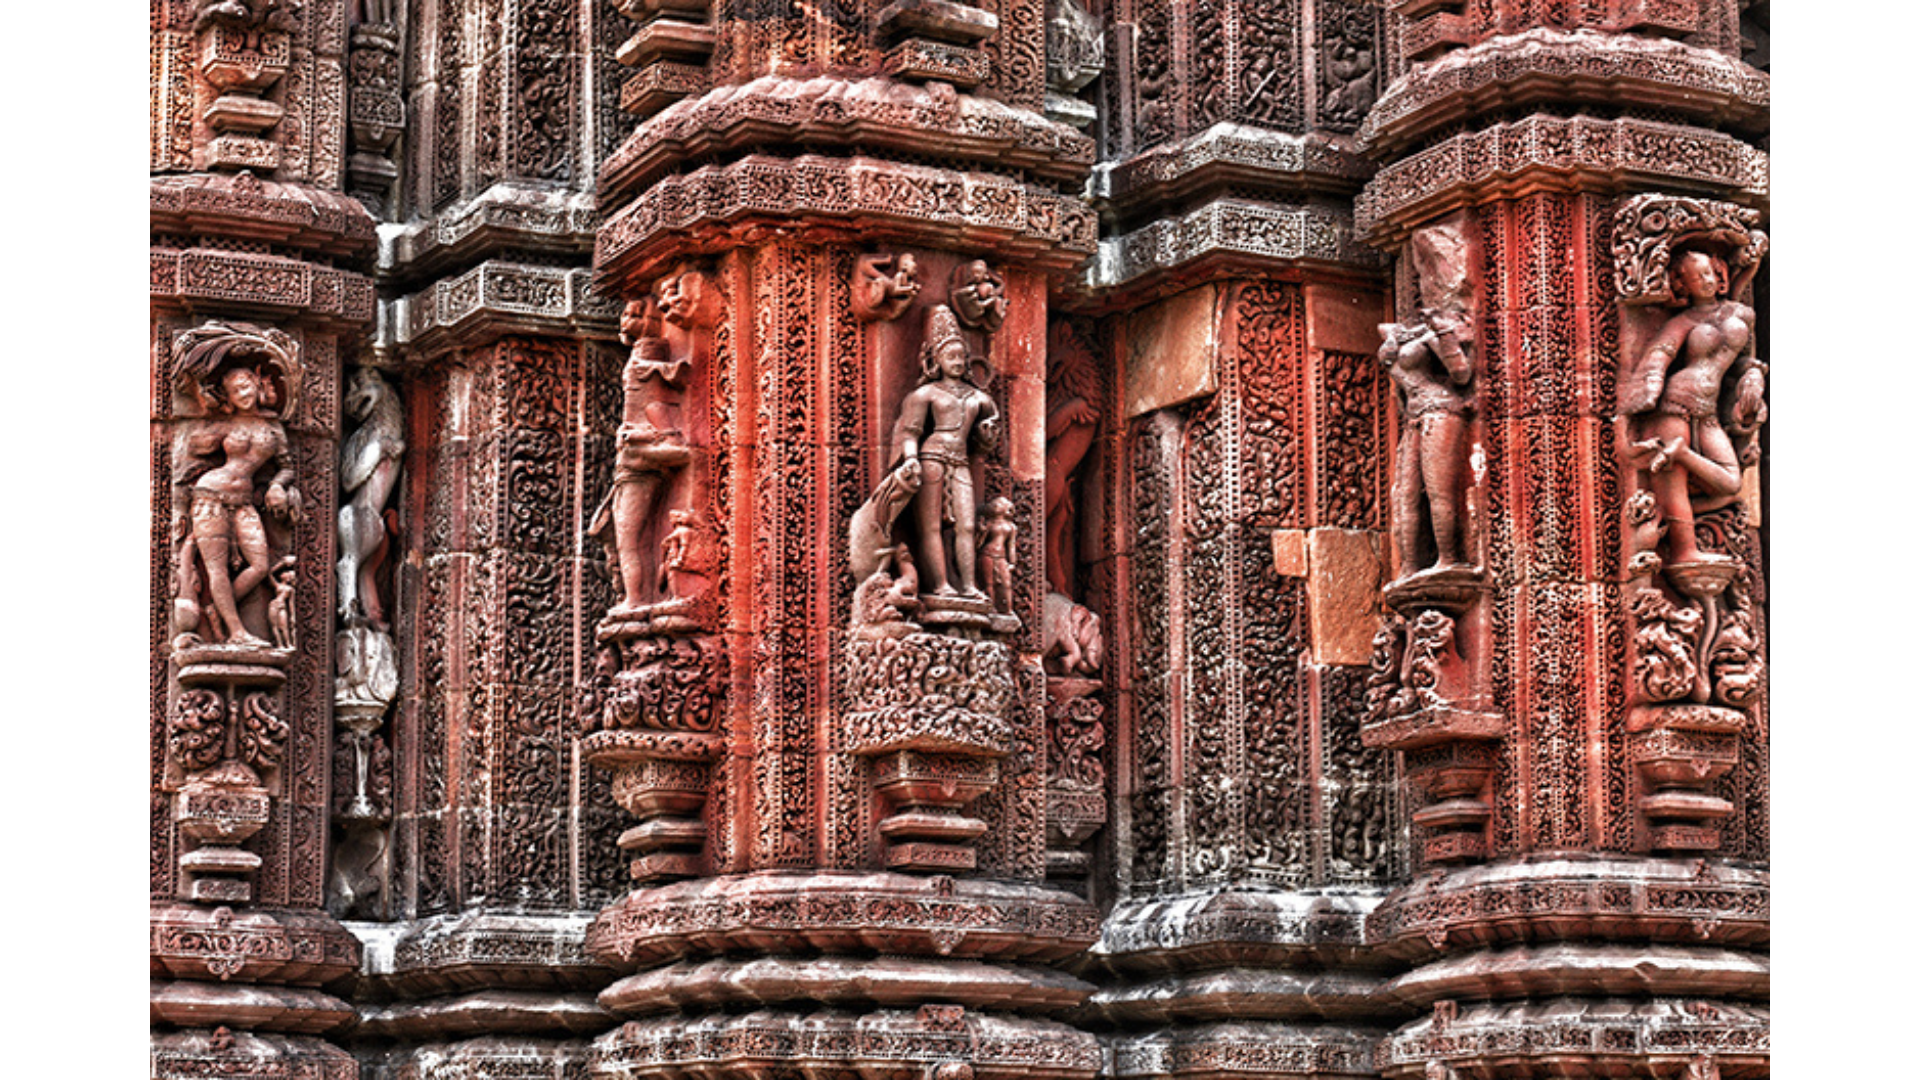 Carvings of Varuna, Lord of the Waters, and other gods, on the temple walls. The female figures in various poses have striking similarities to those found in the Khajuraho temples in Madhya Pradesh.